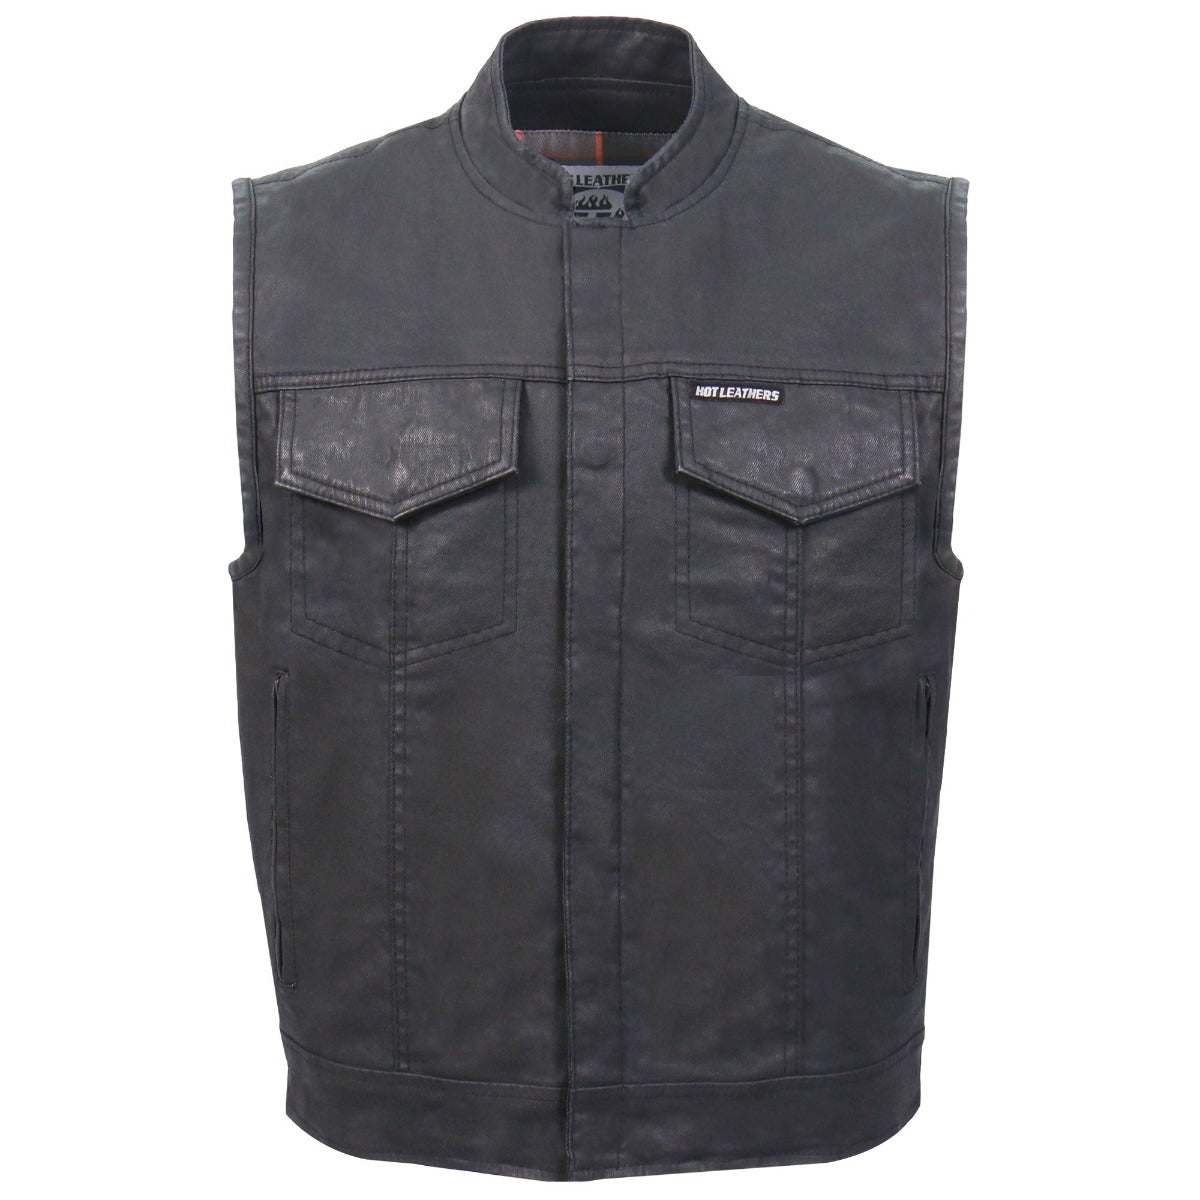 Hot Leathers Men's Waxed Cotton Club Style Vest